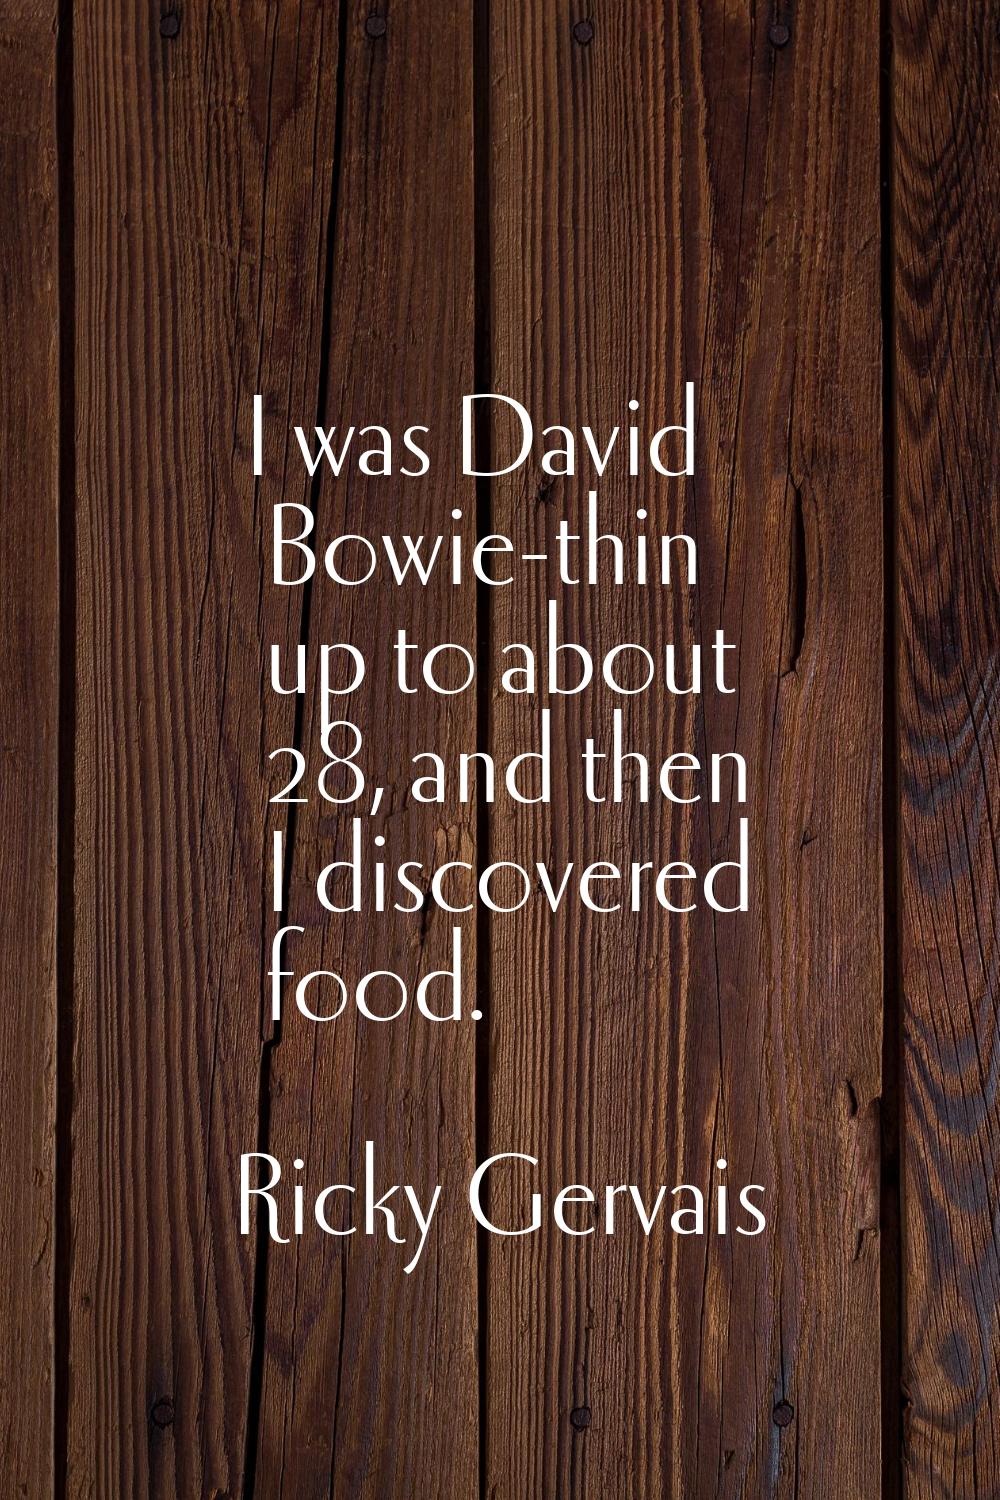 I was David Bowie-thin up to about 28, and then I discovered food.